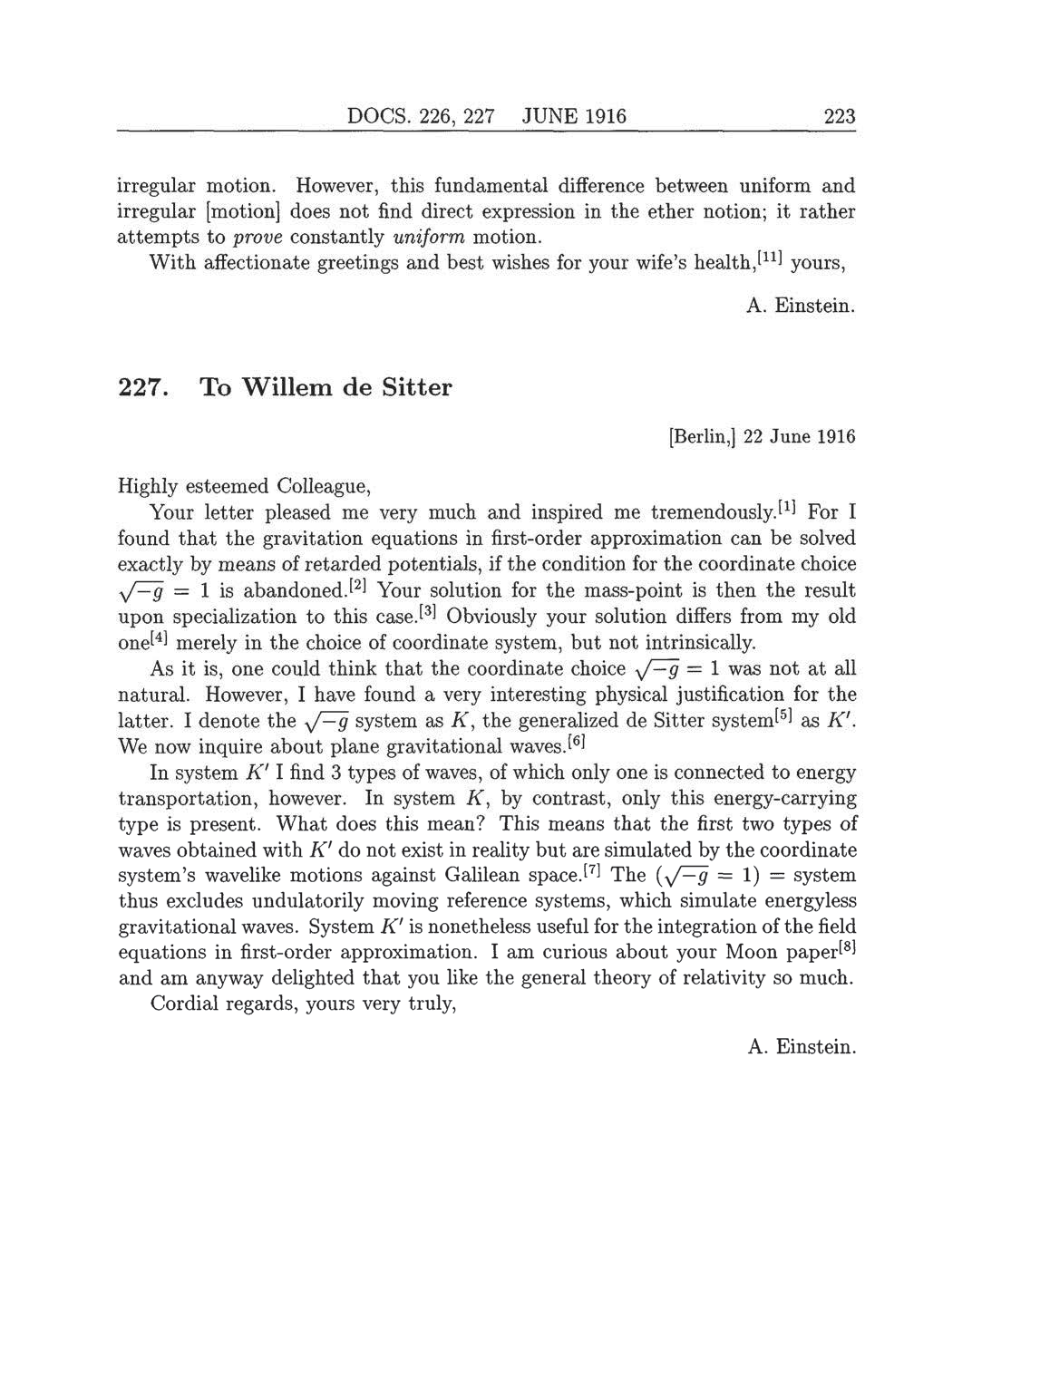 Volume 8: The Berlin Years: Correspondence, 1914-1918 (English translation supplement) page 223